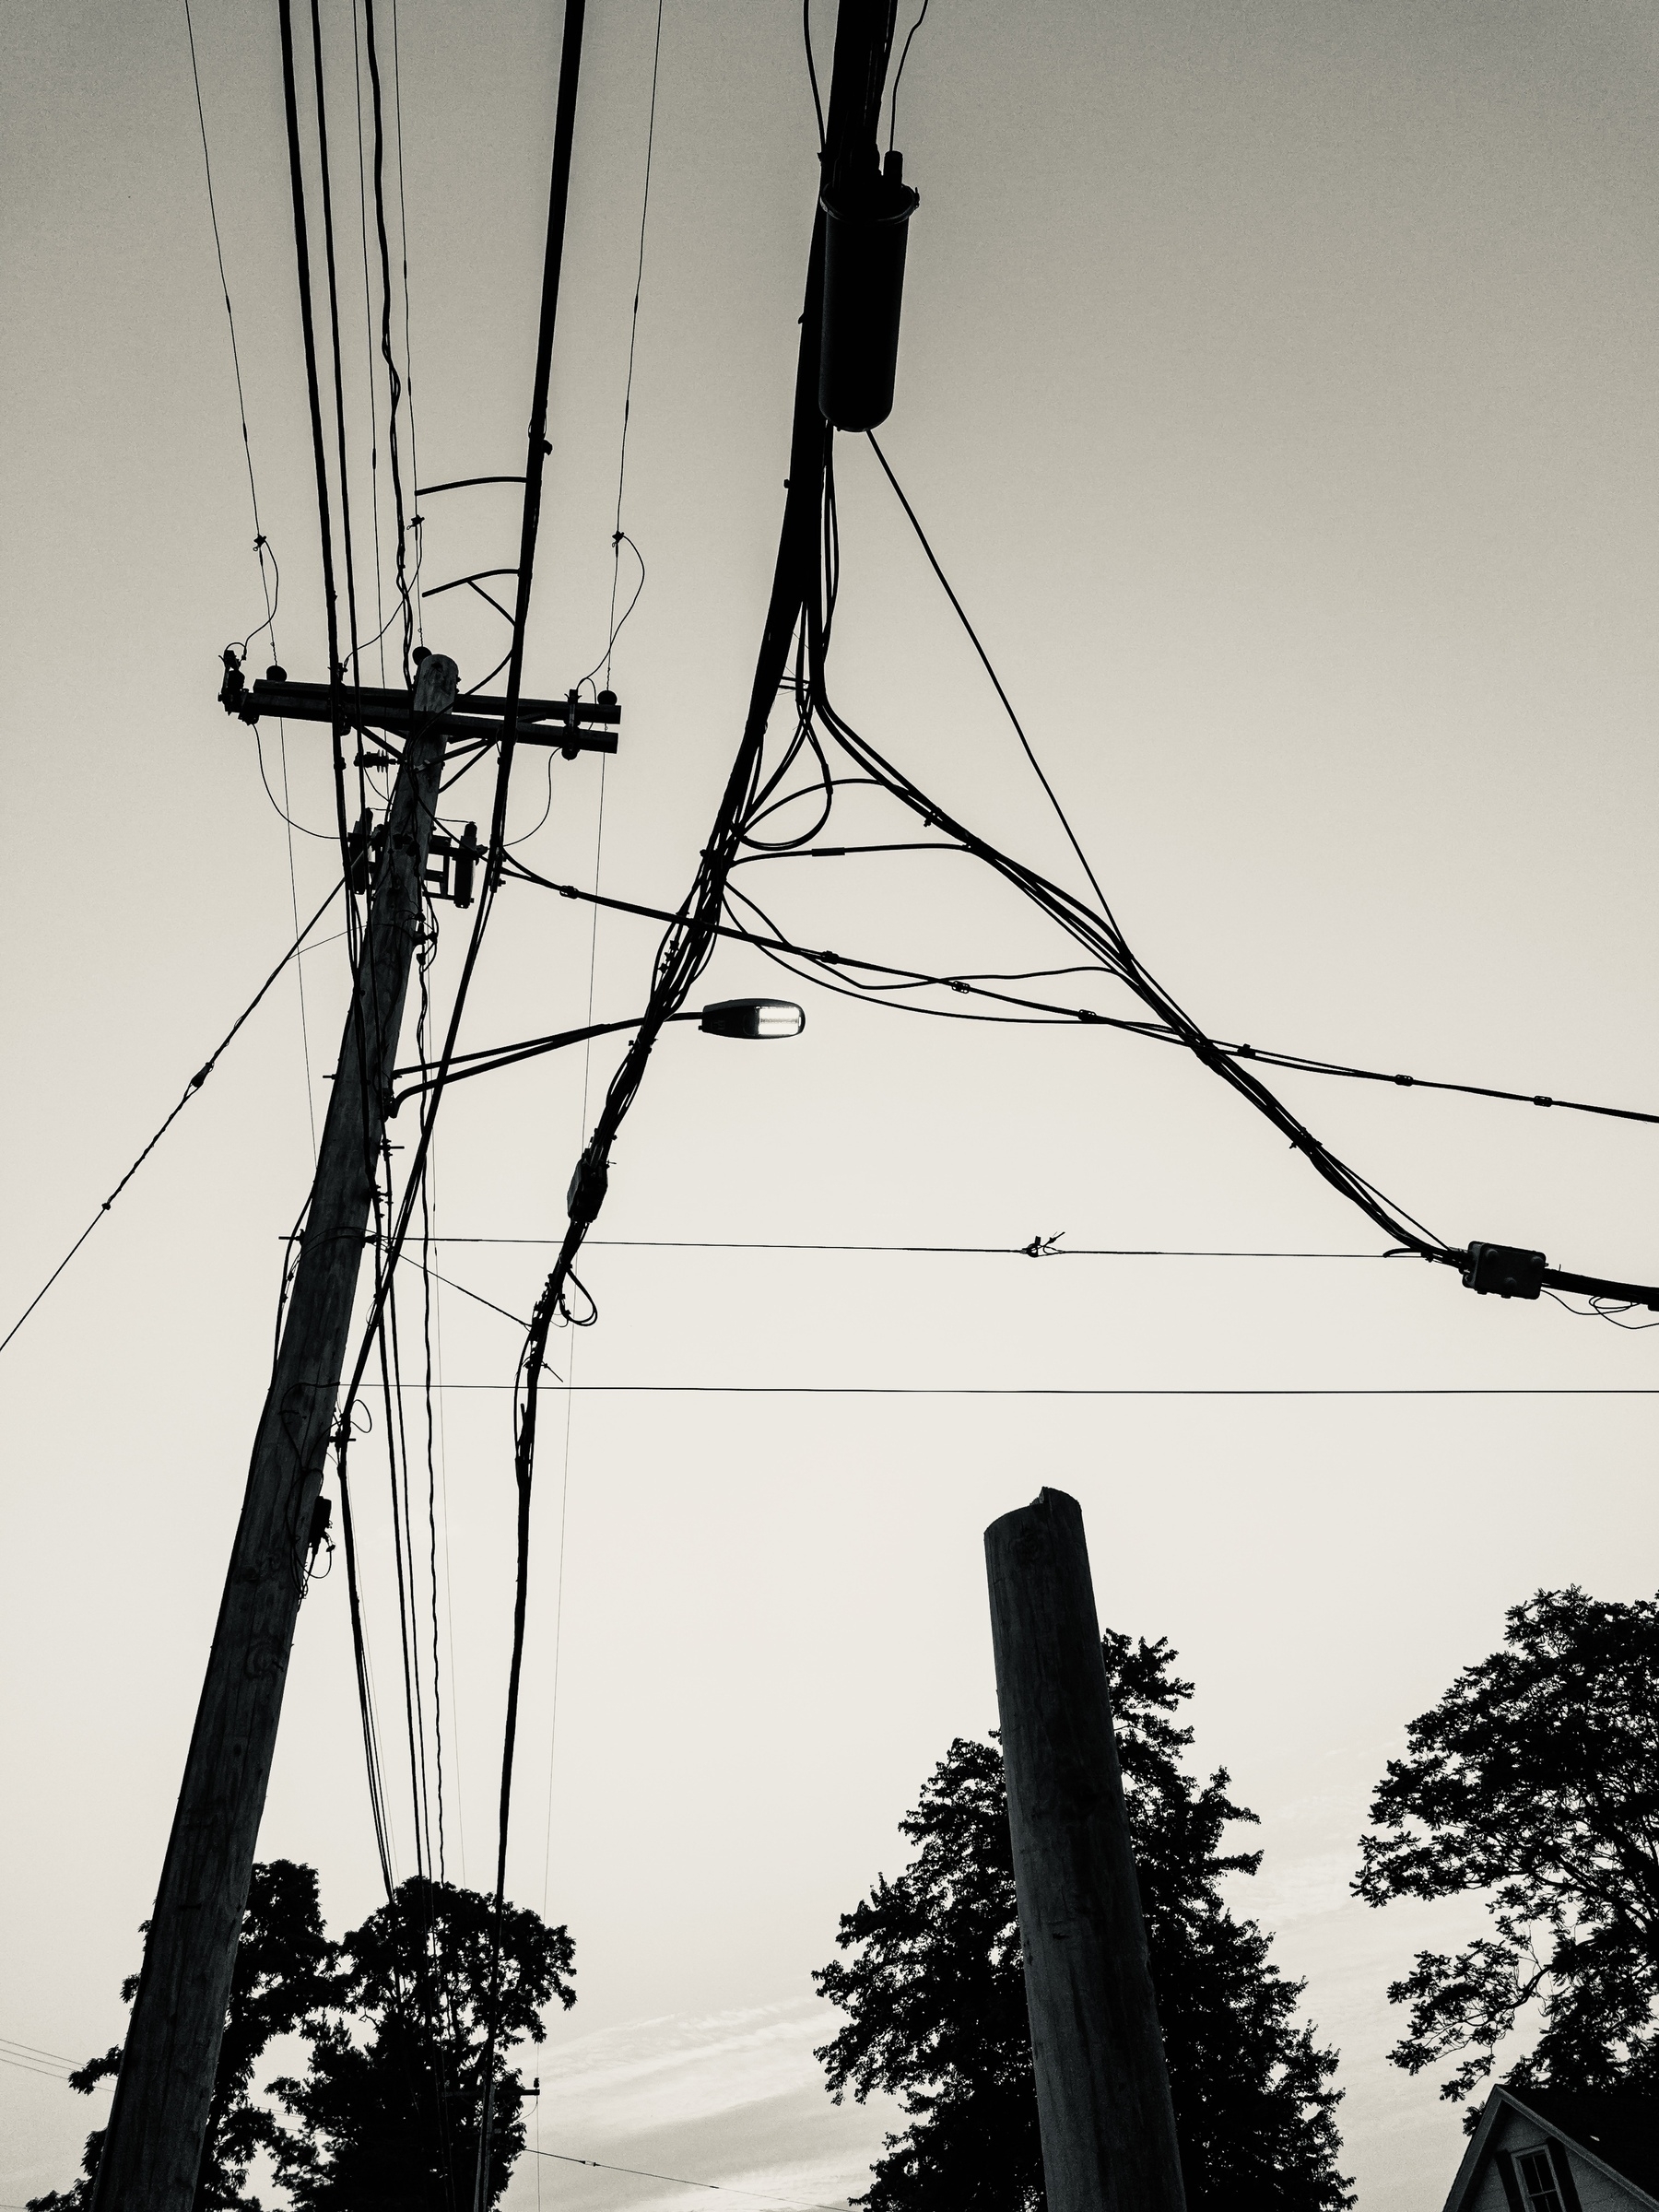 Wires and utility pole against early morning sky. Silvertone photo effect.